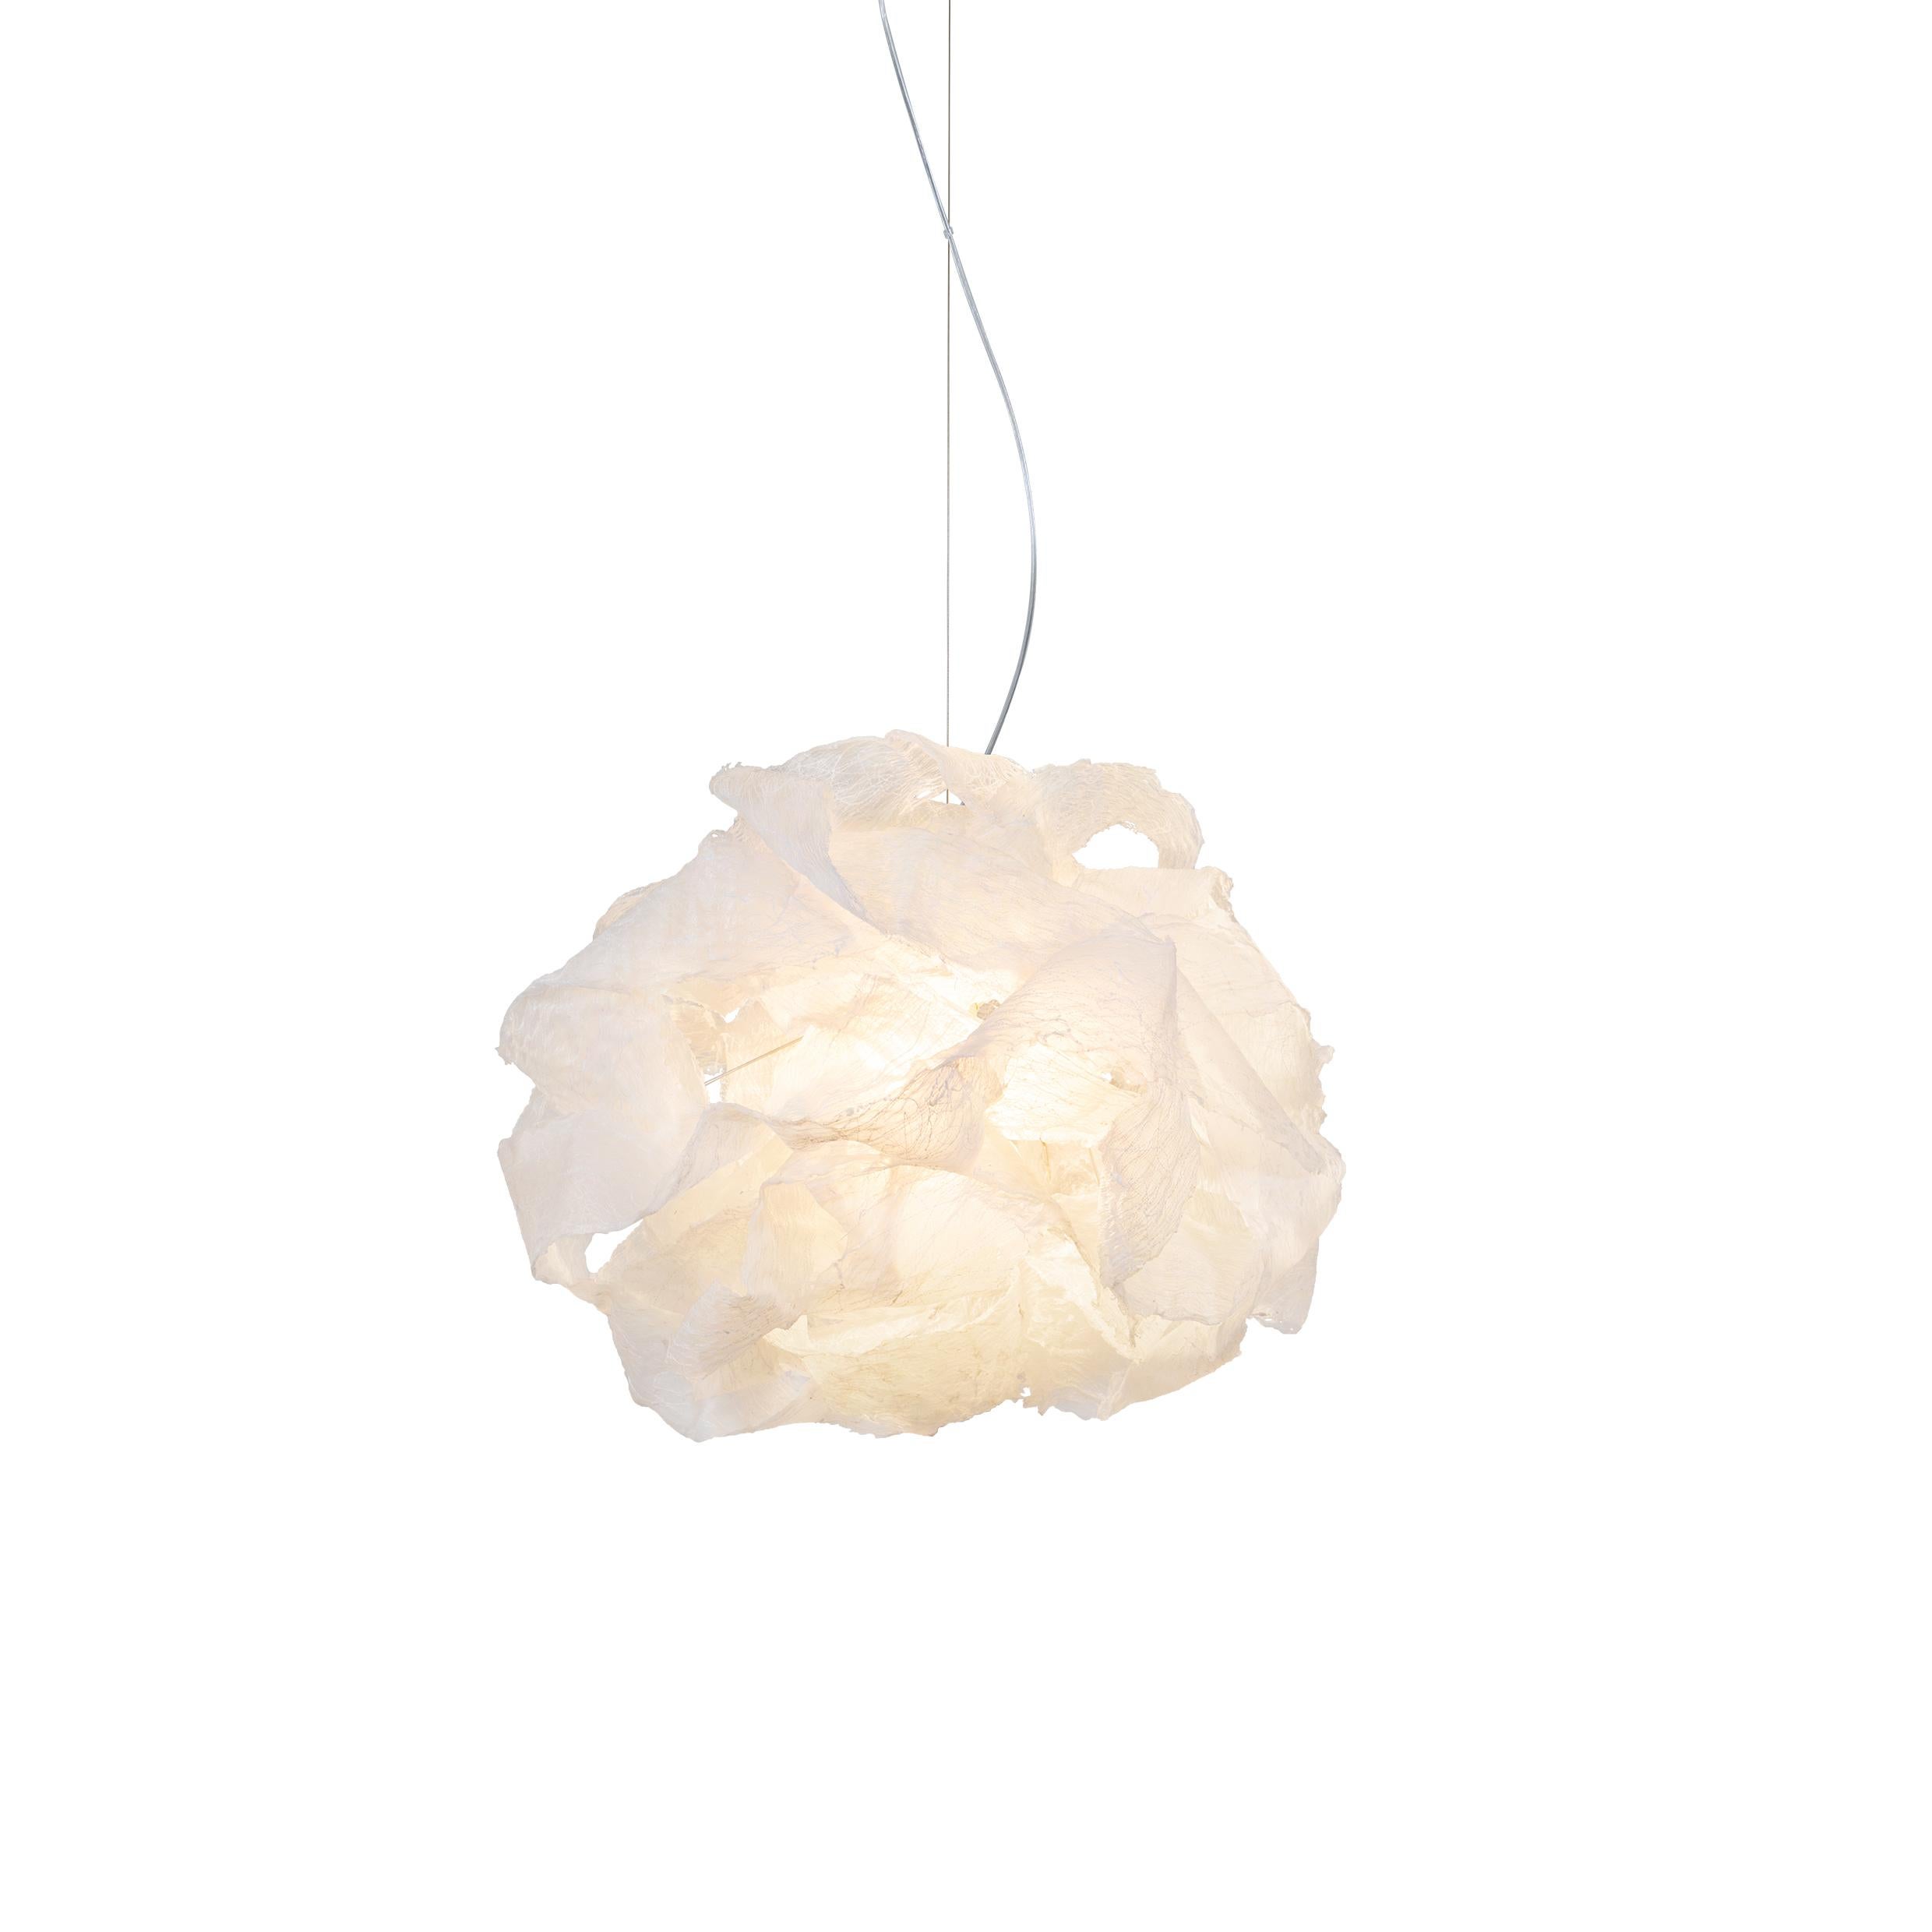 Organic Modern Transcendence 1 by Ango, Handcrafted Diaphanous Cloud Pendant Light For Sale